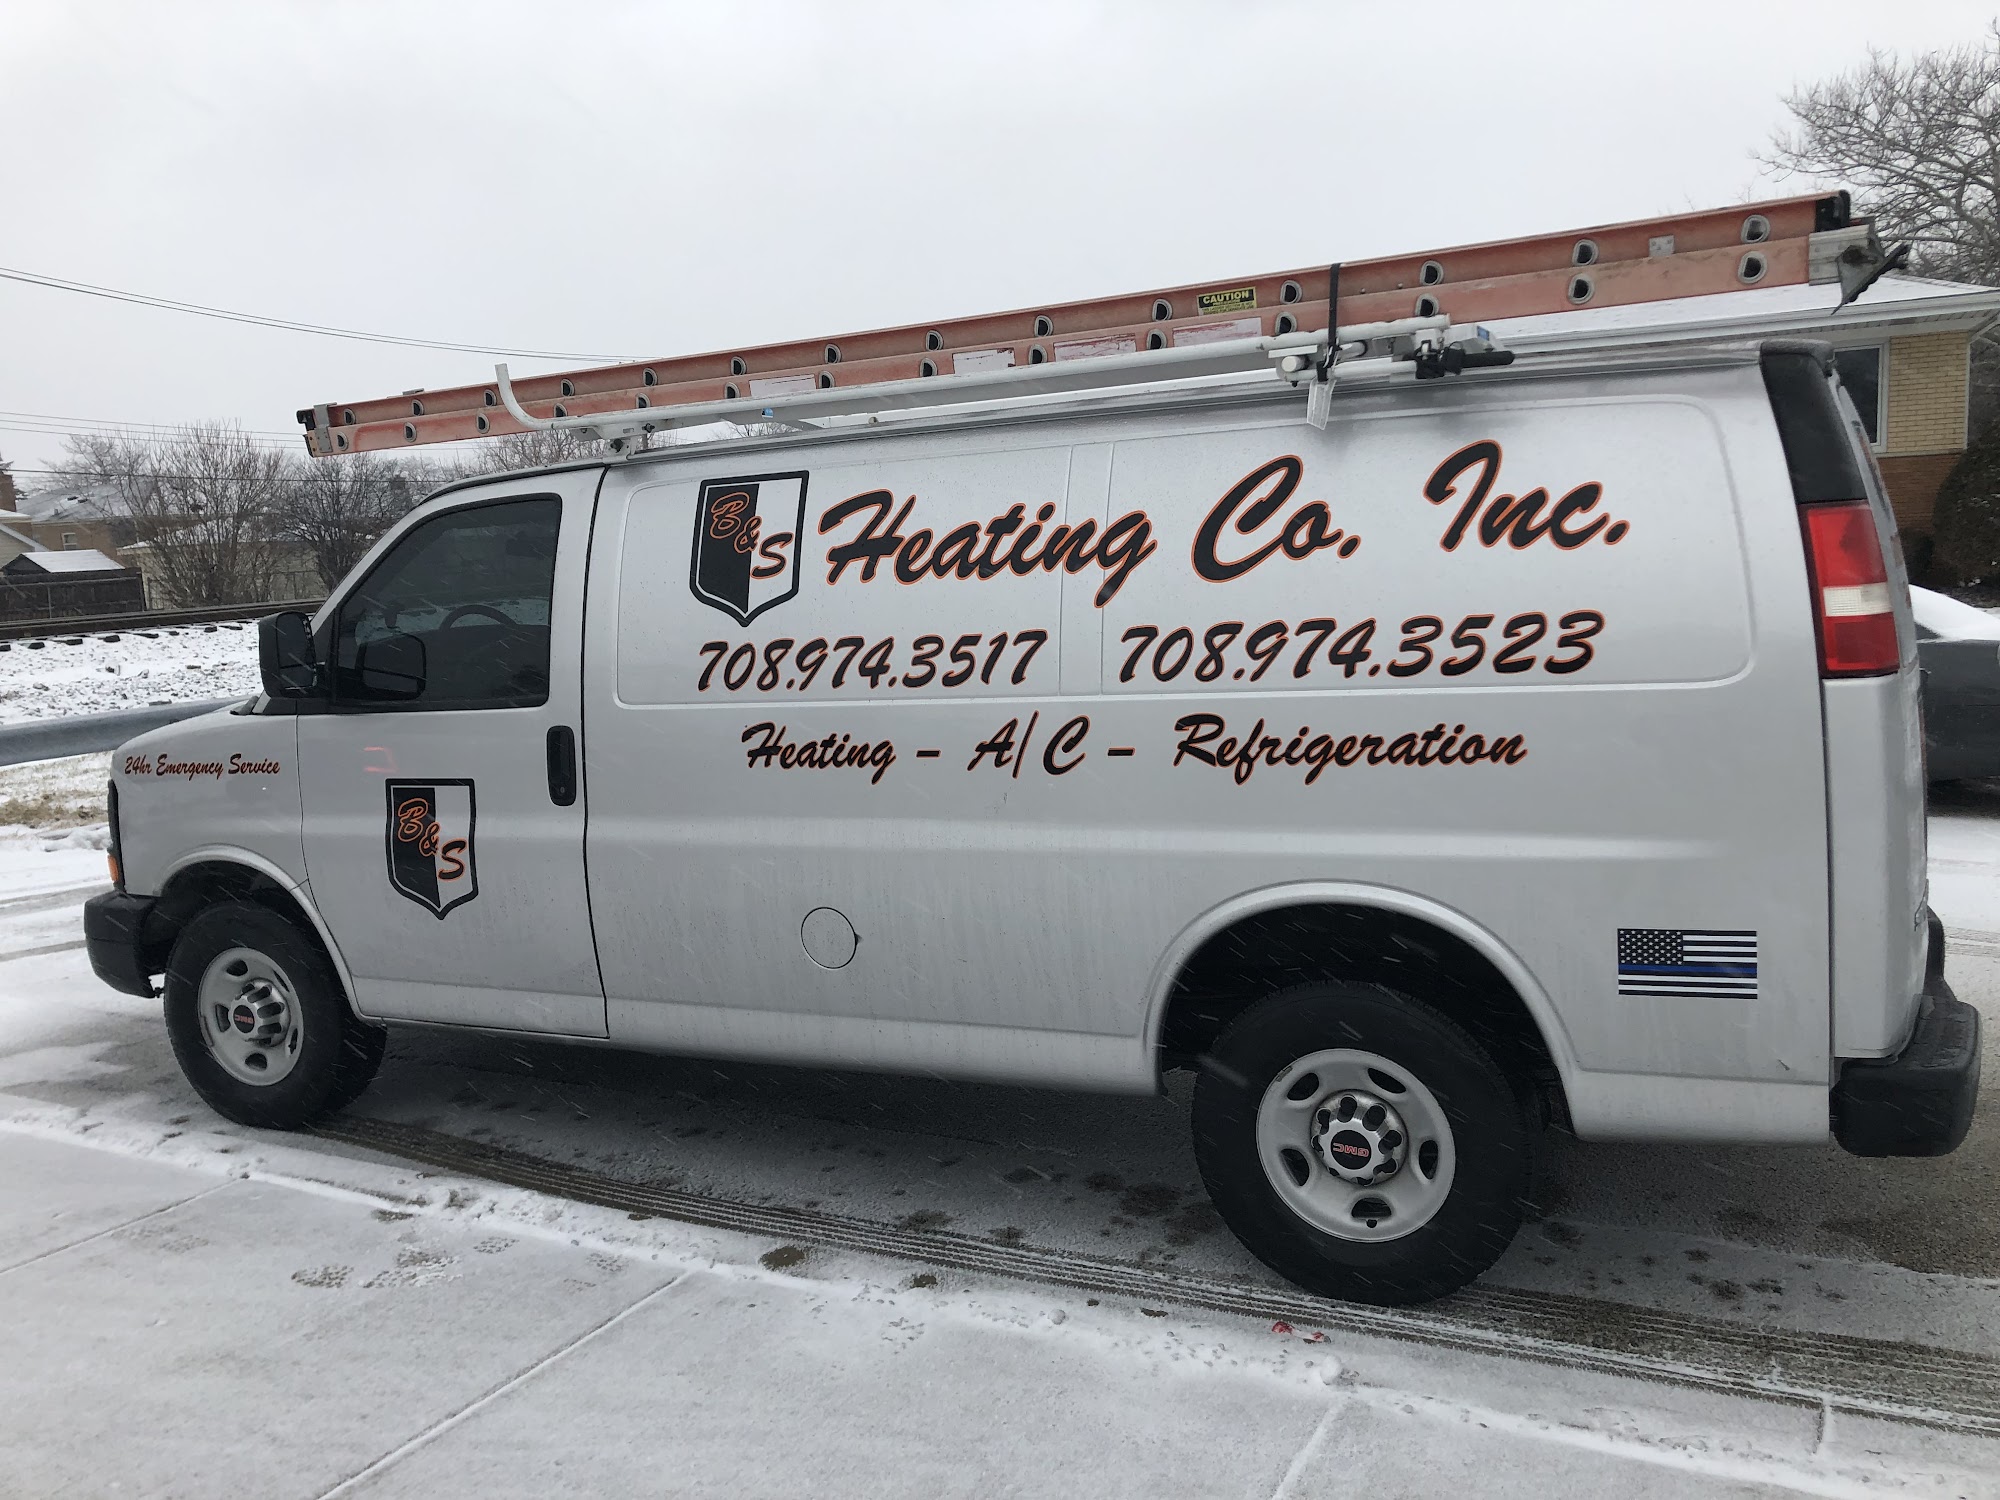 B and S Heating Co